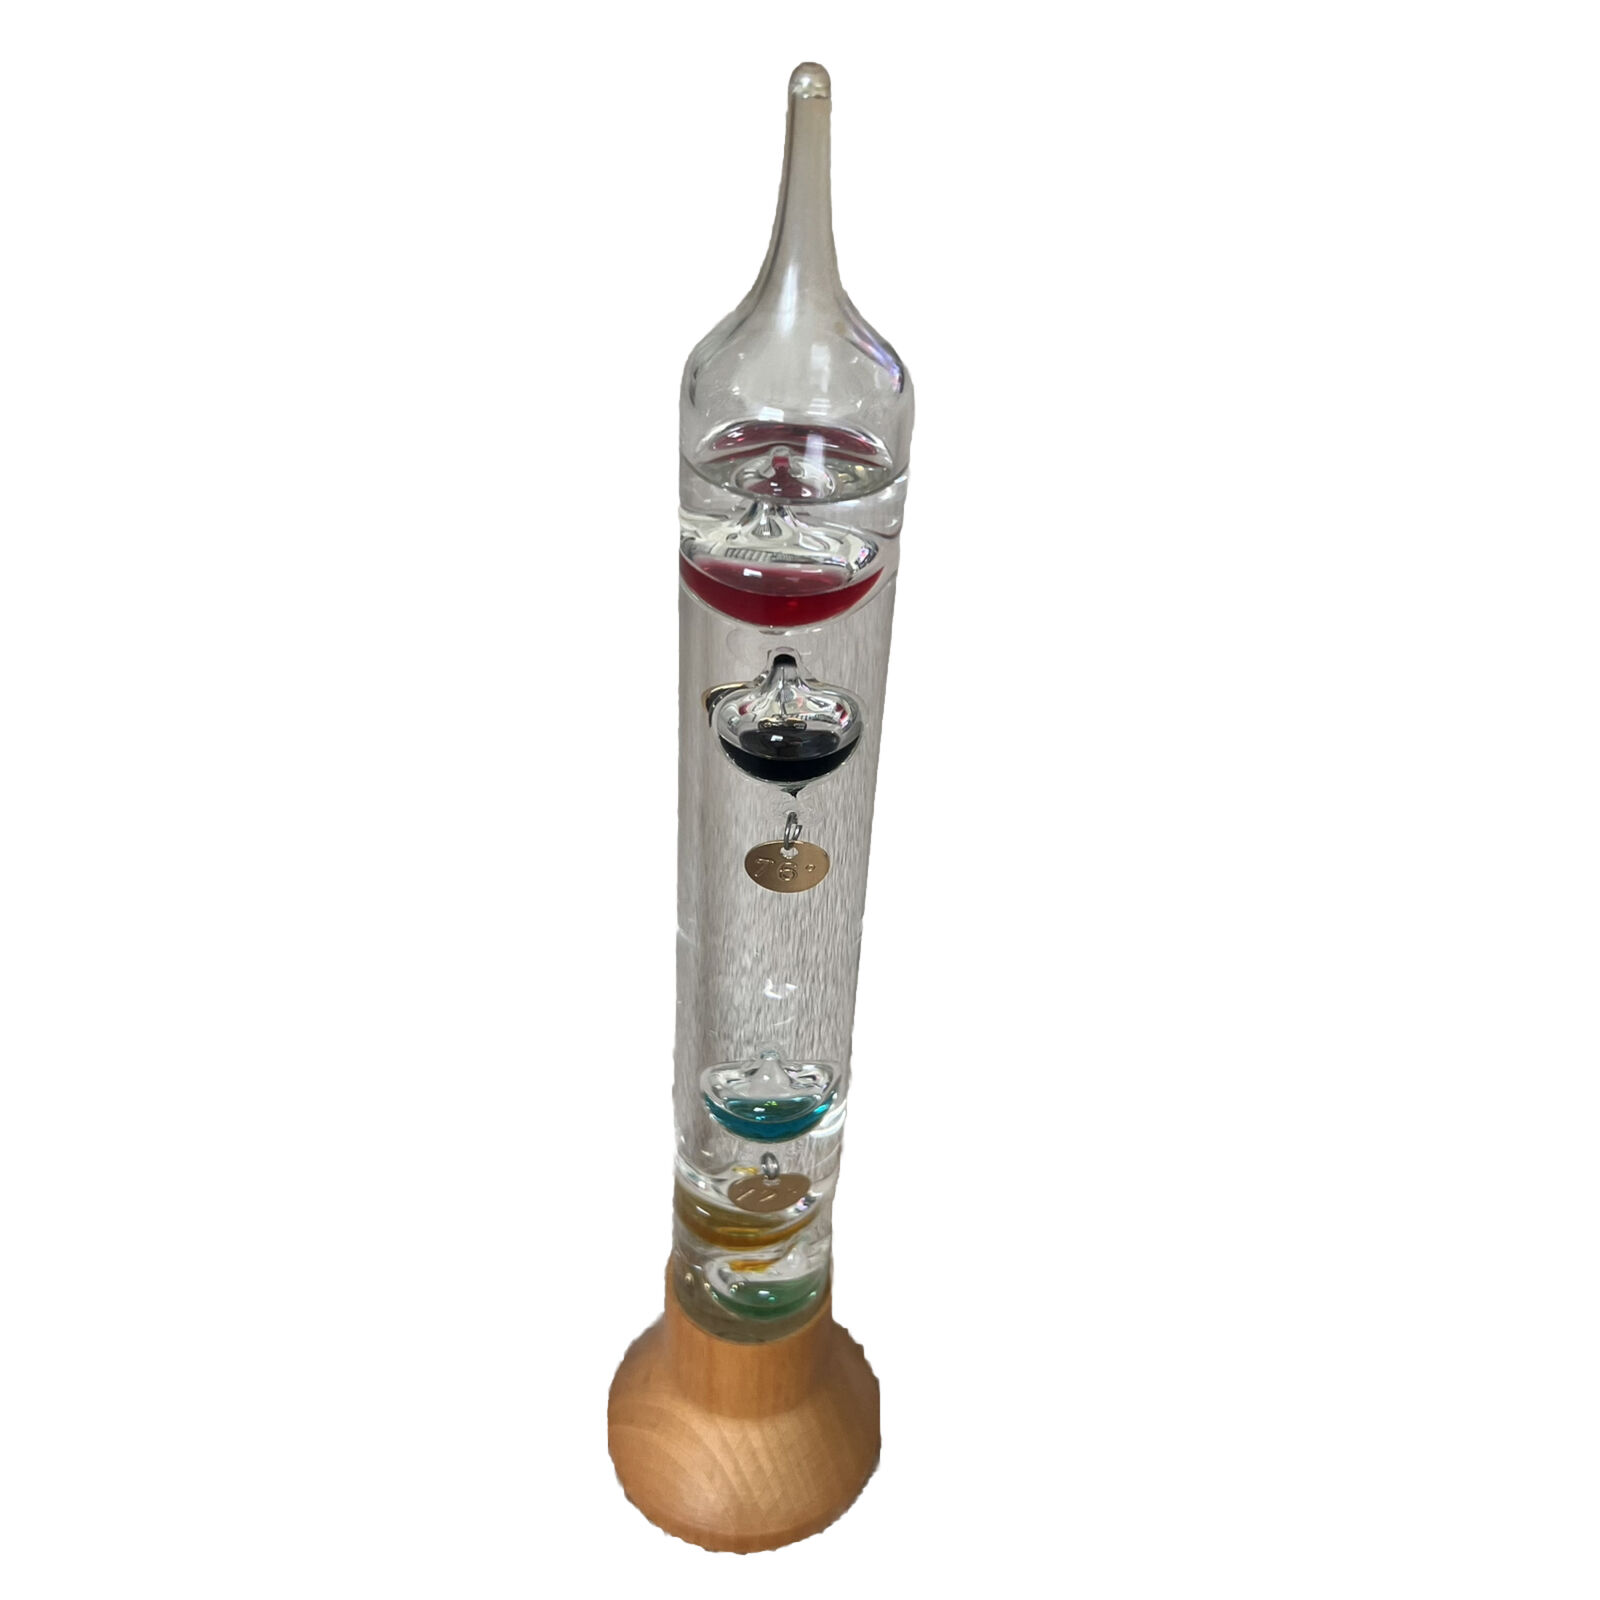  Galileo Liquid Thermometer 12” Tall with Wooden Base